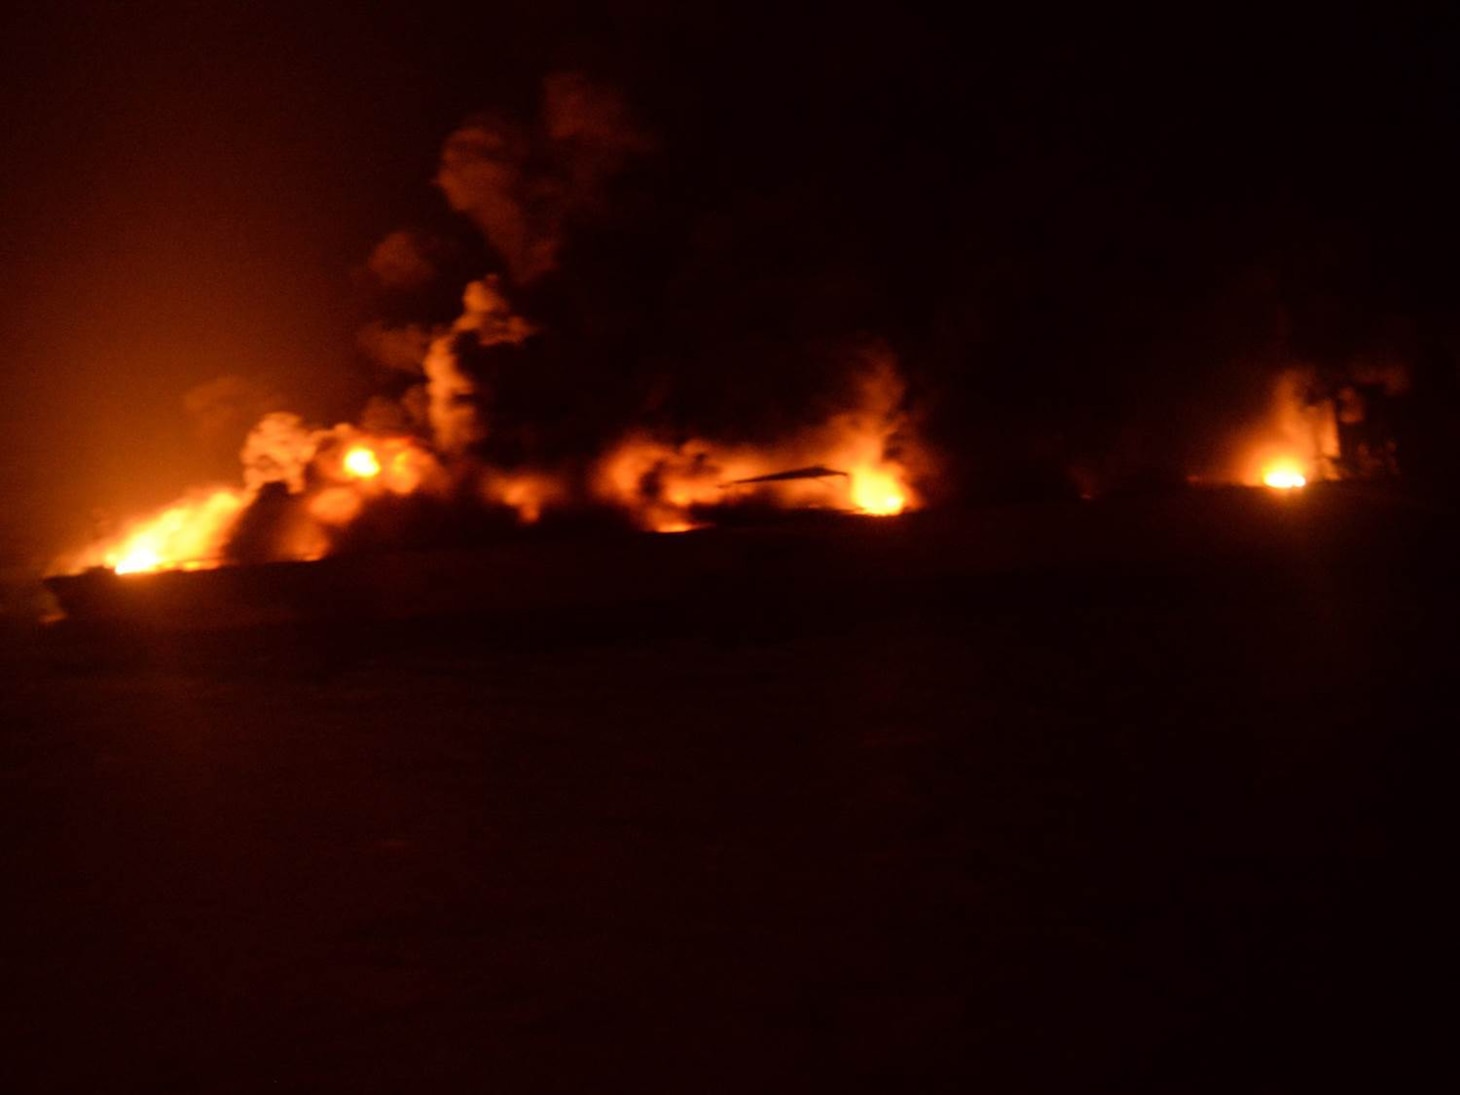 Iranian-owned and -operated, Panamanian-flagged MV Sanchi burns following a Jan. 6 collision with Chinese-flagged cargo ship CF Crystal. The image was captured by a U.S. Navy P-8A aircraft attached to the 'Fighting Tigers' of Patrol Squadron EIGHT (VP 8) while assisting in the international search and rescue (SAR) effort for MV Sanchi's 32 missing crew members following the collision.